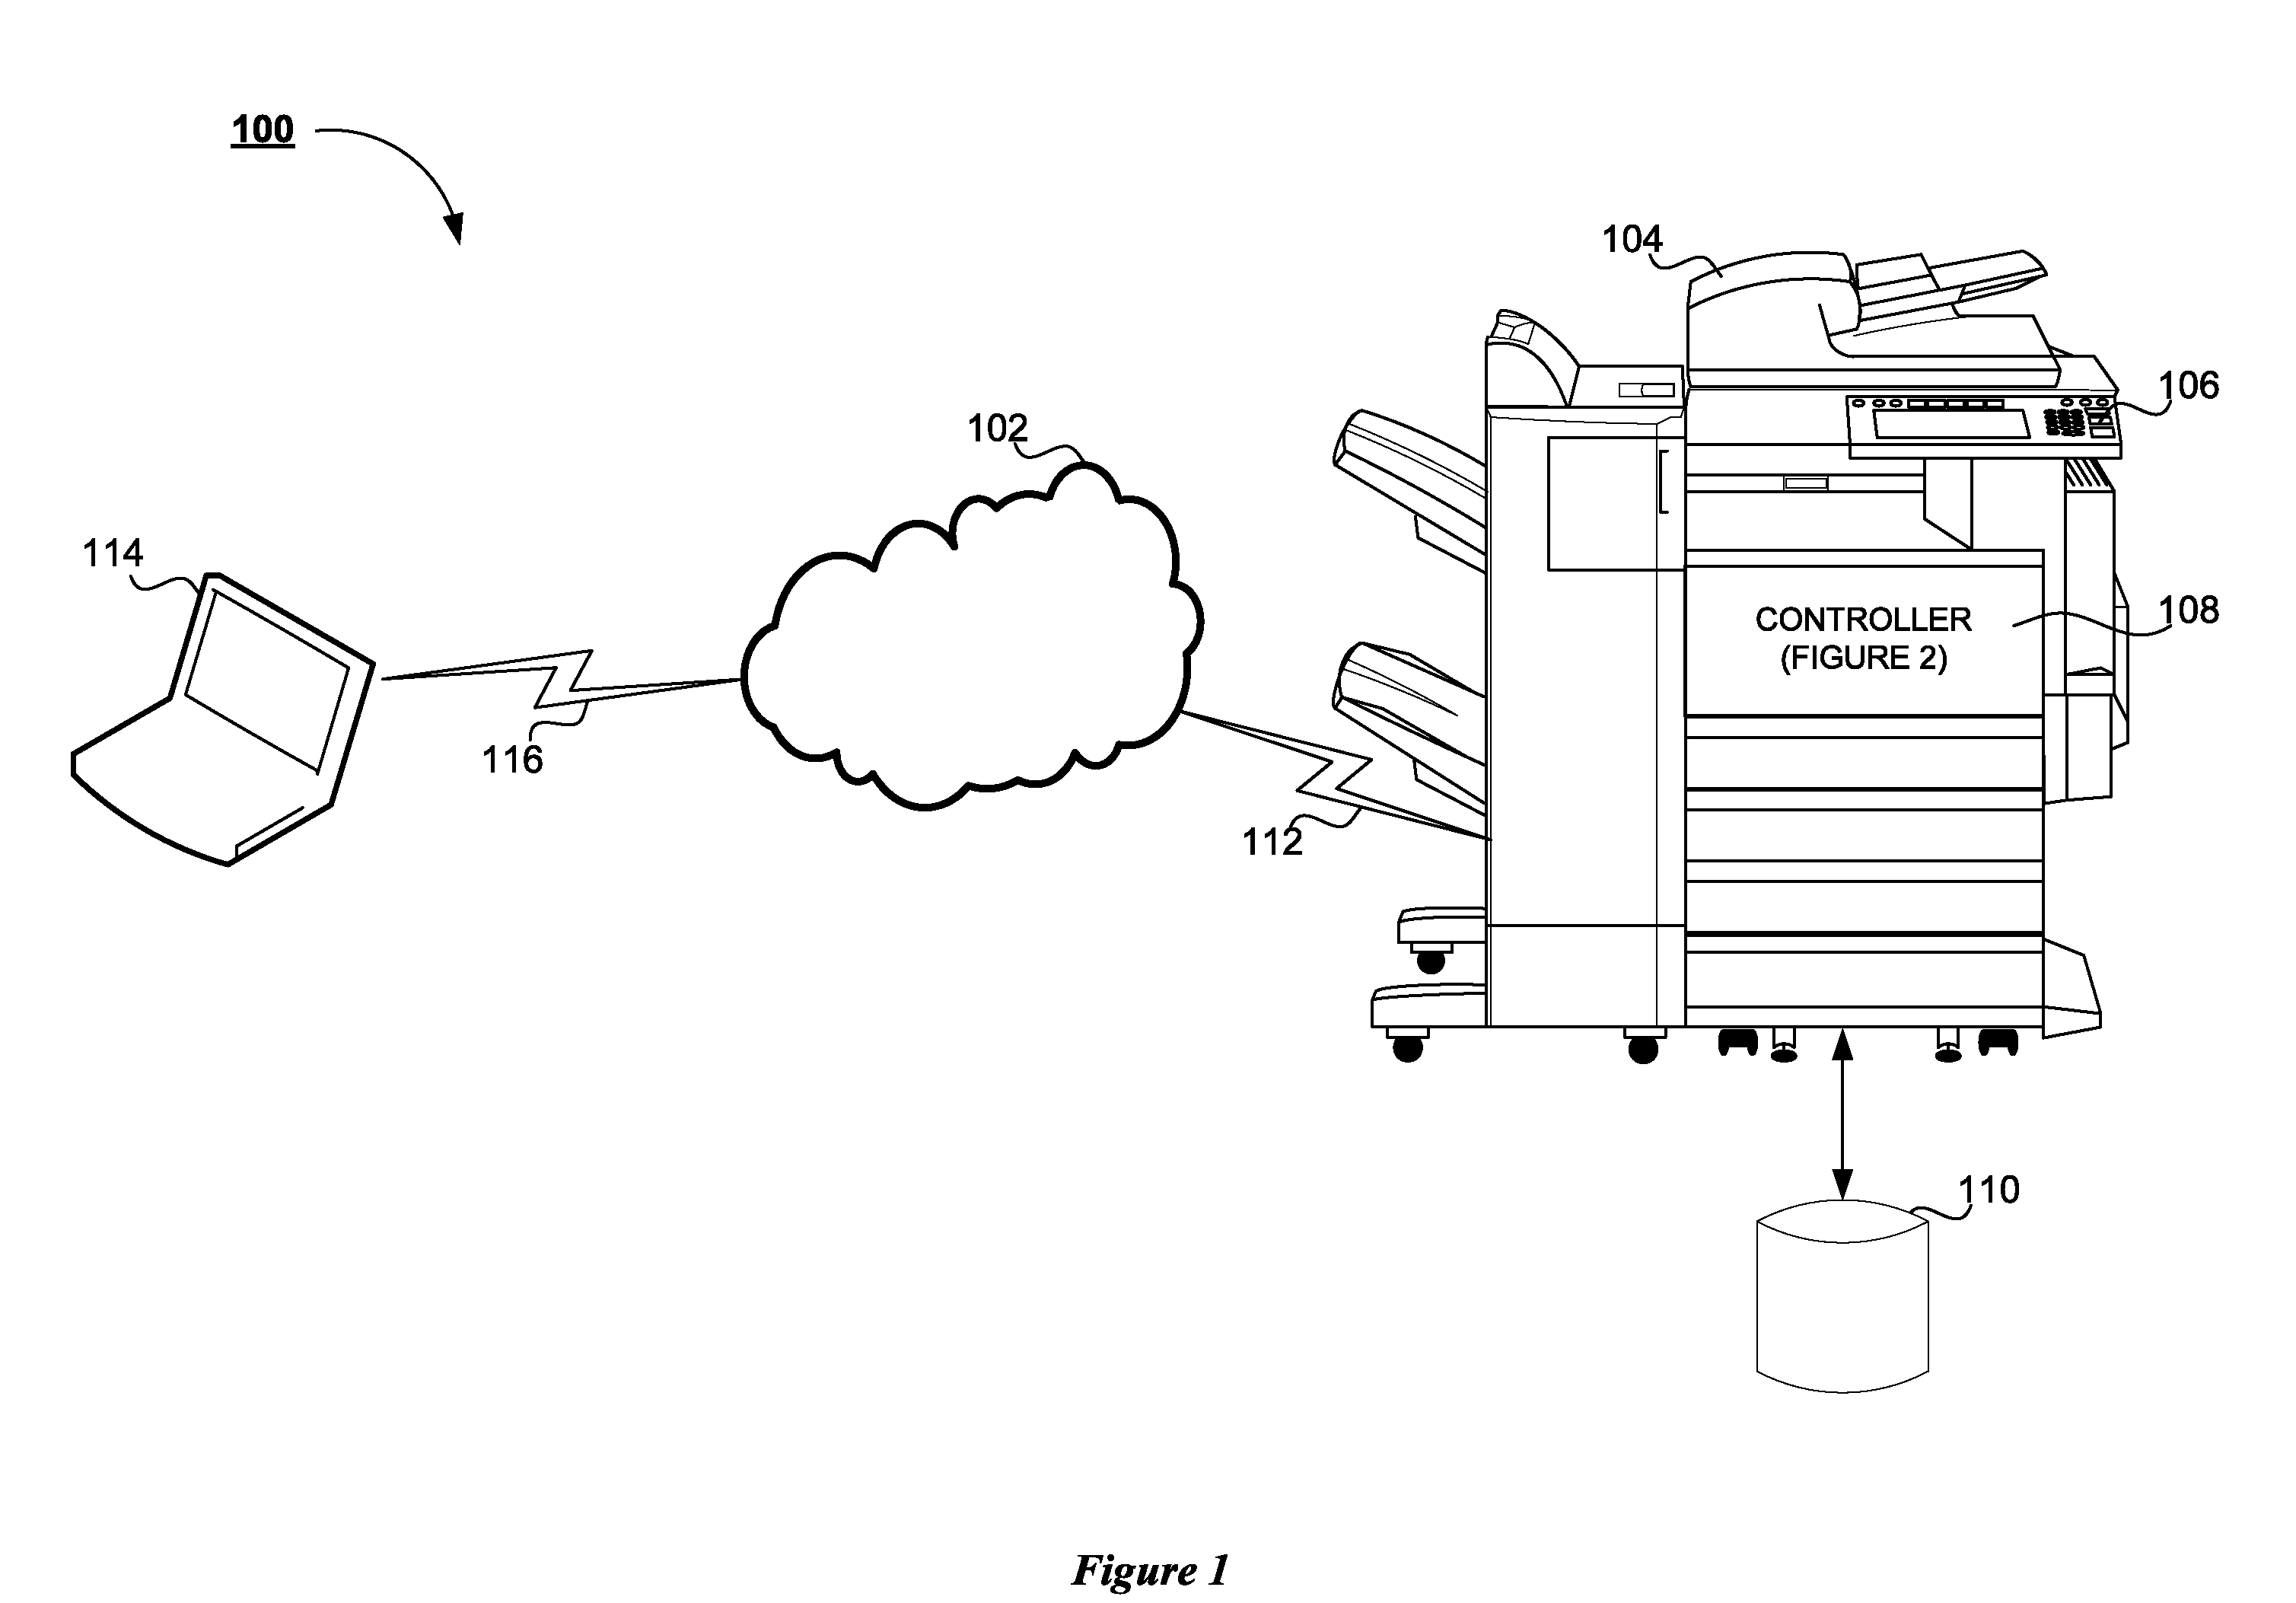 System and method for generating a customized workflow user interface